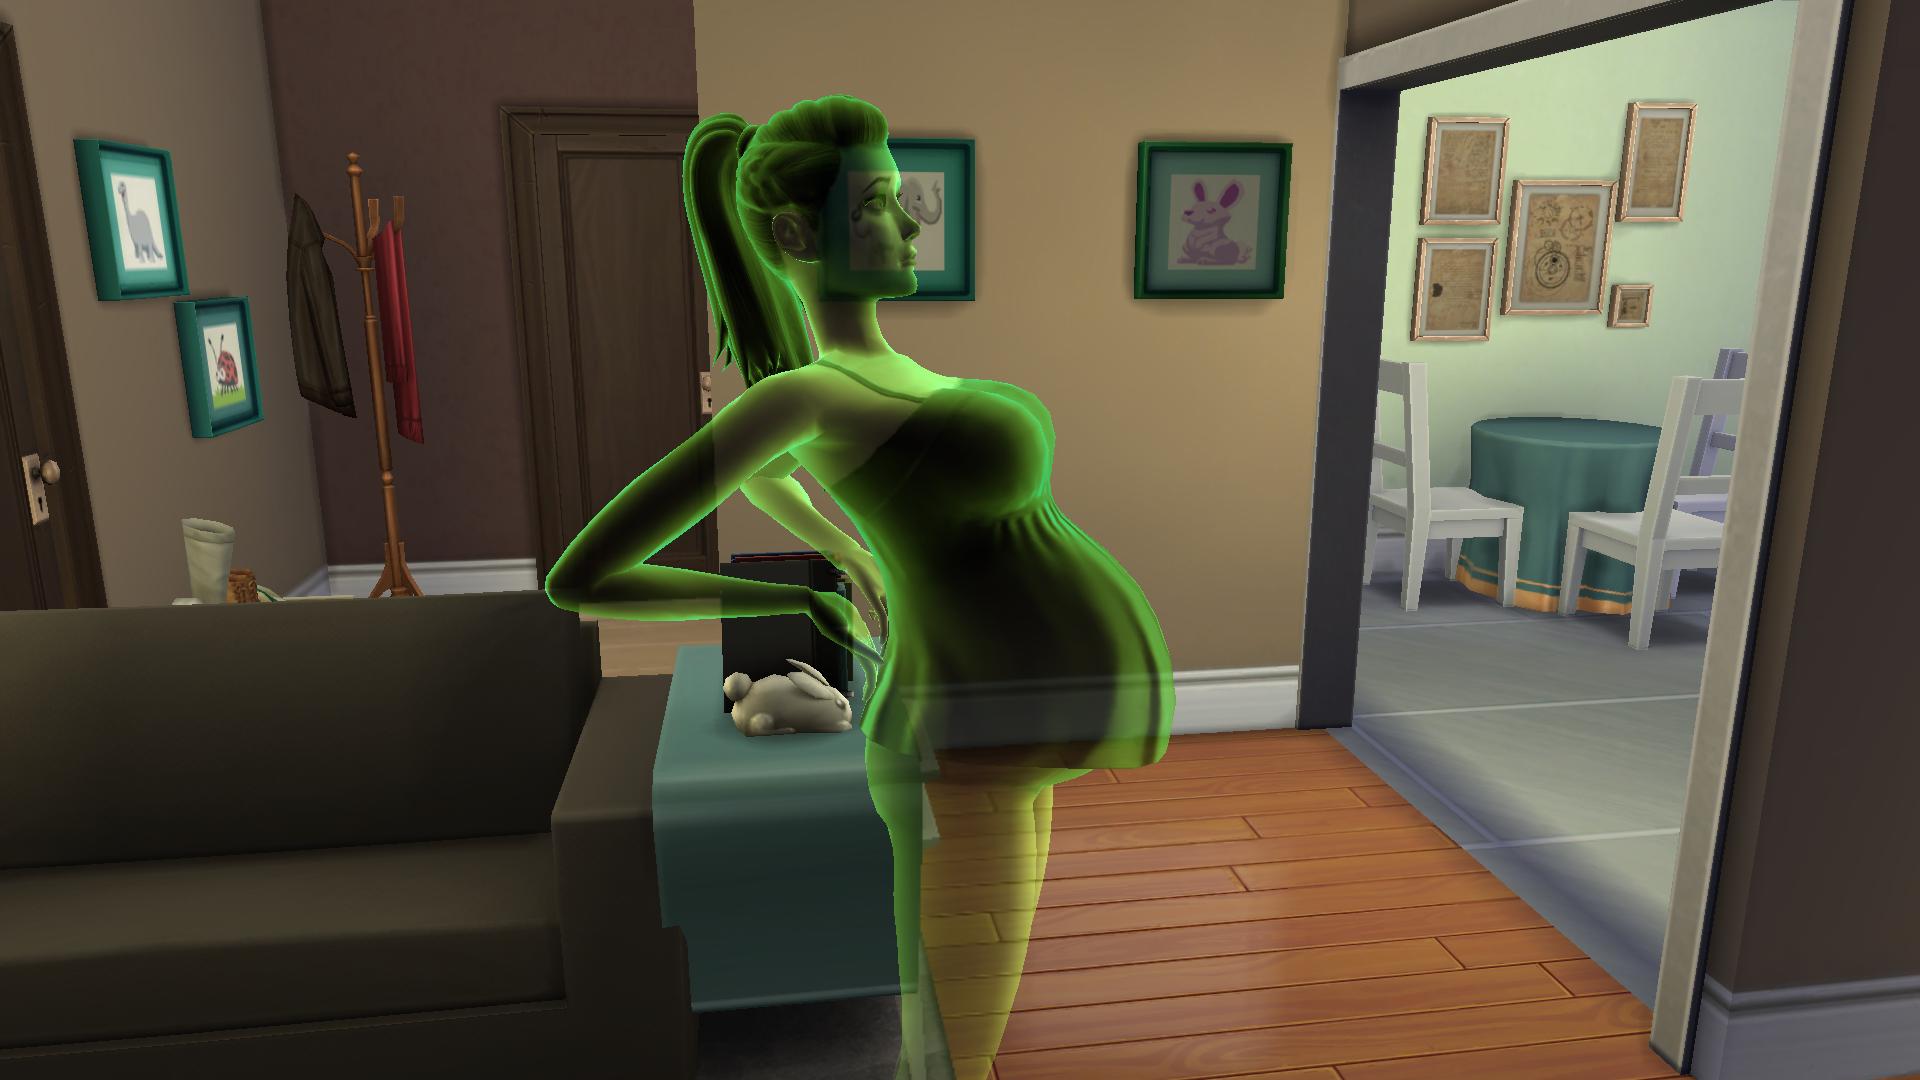 The green translucent female sim is clearly pregnant in the sims 4 sex mod. Ghosts can have babies!